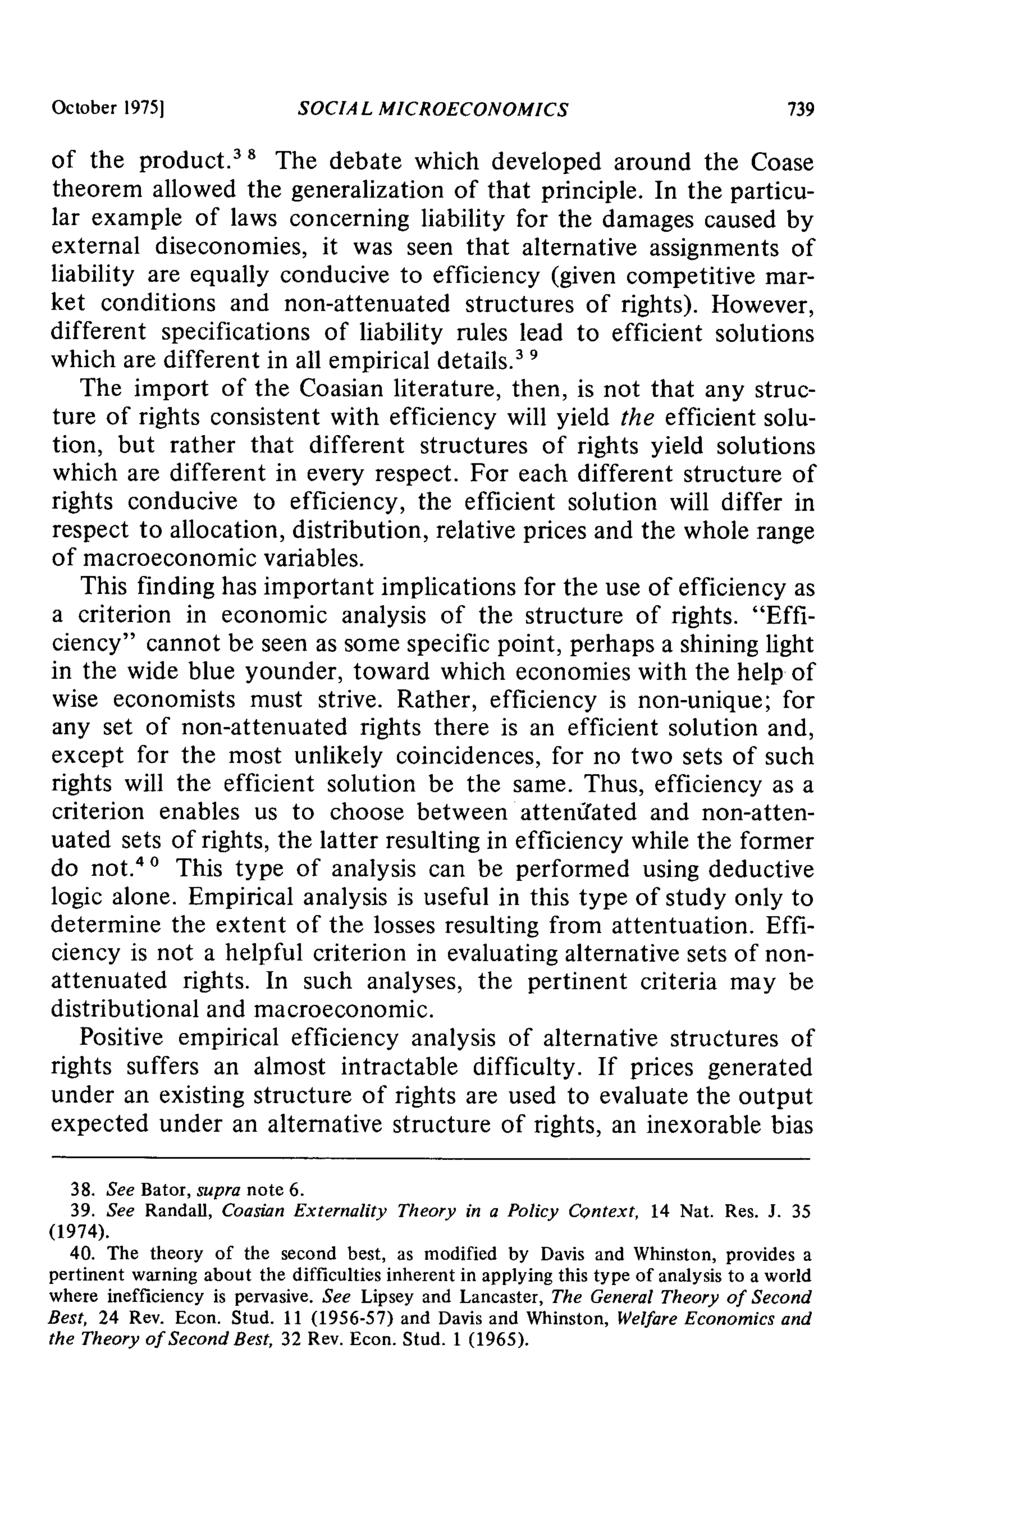 October 19751 SOCIAL MICROECONOMICS of the product. 3 " The debate which developed around the Coase theorem allowed the generalization of that principle.